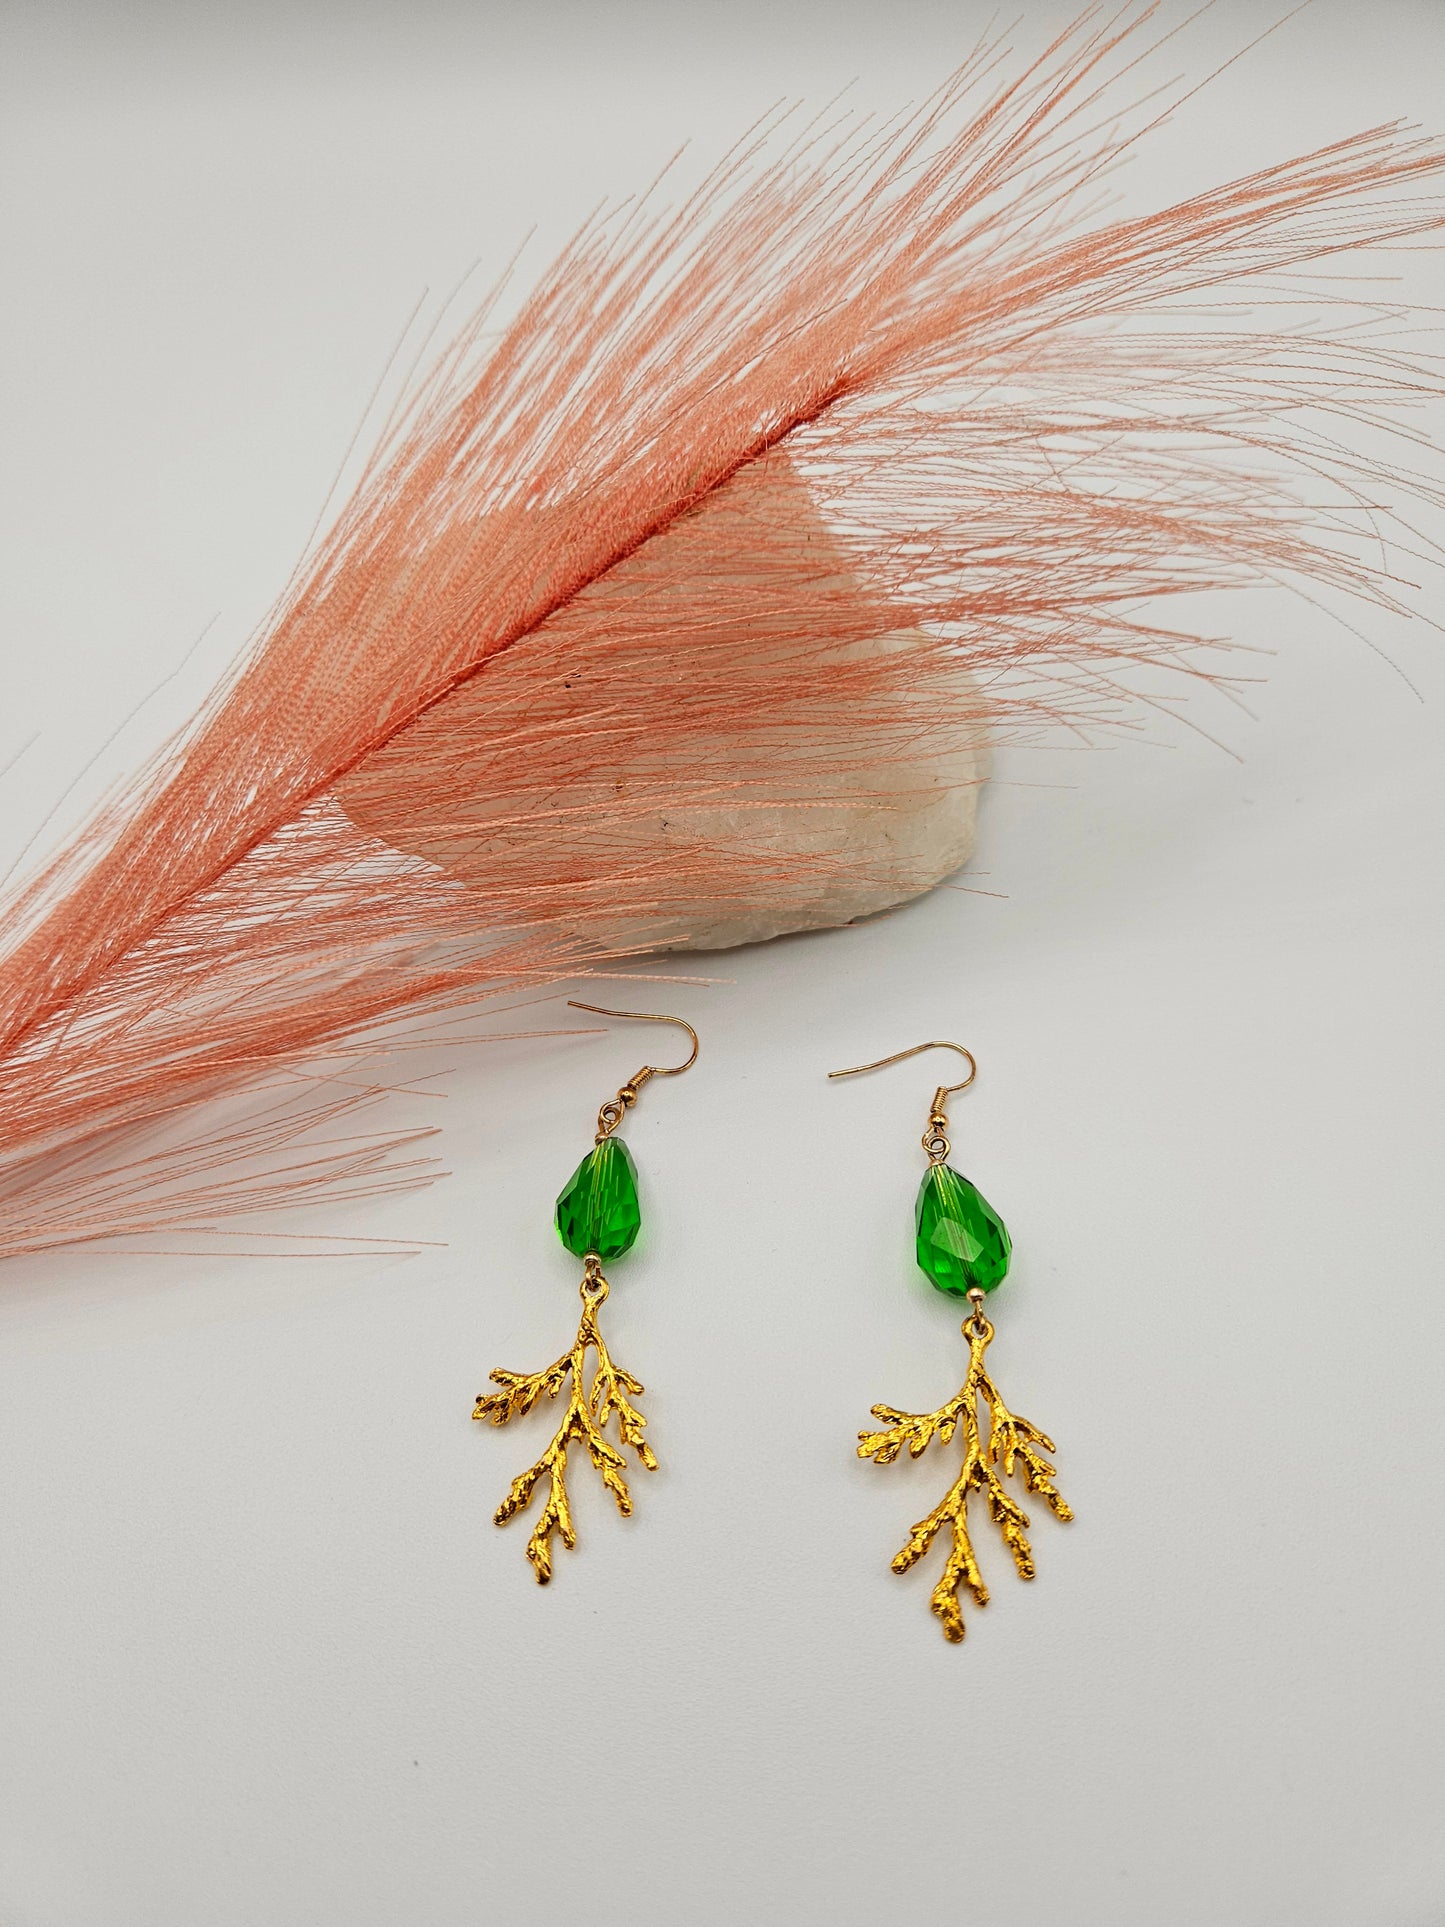 Cedar and green vintage glass drops